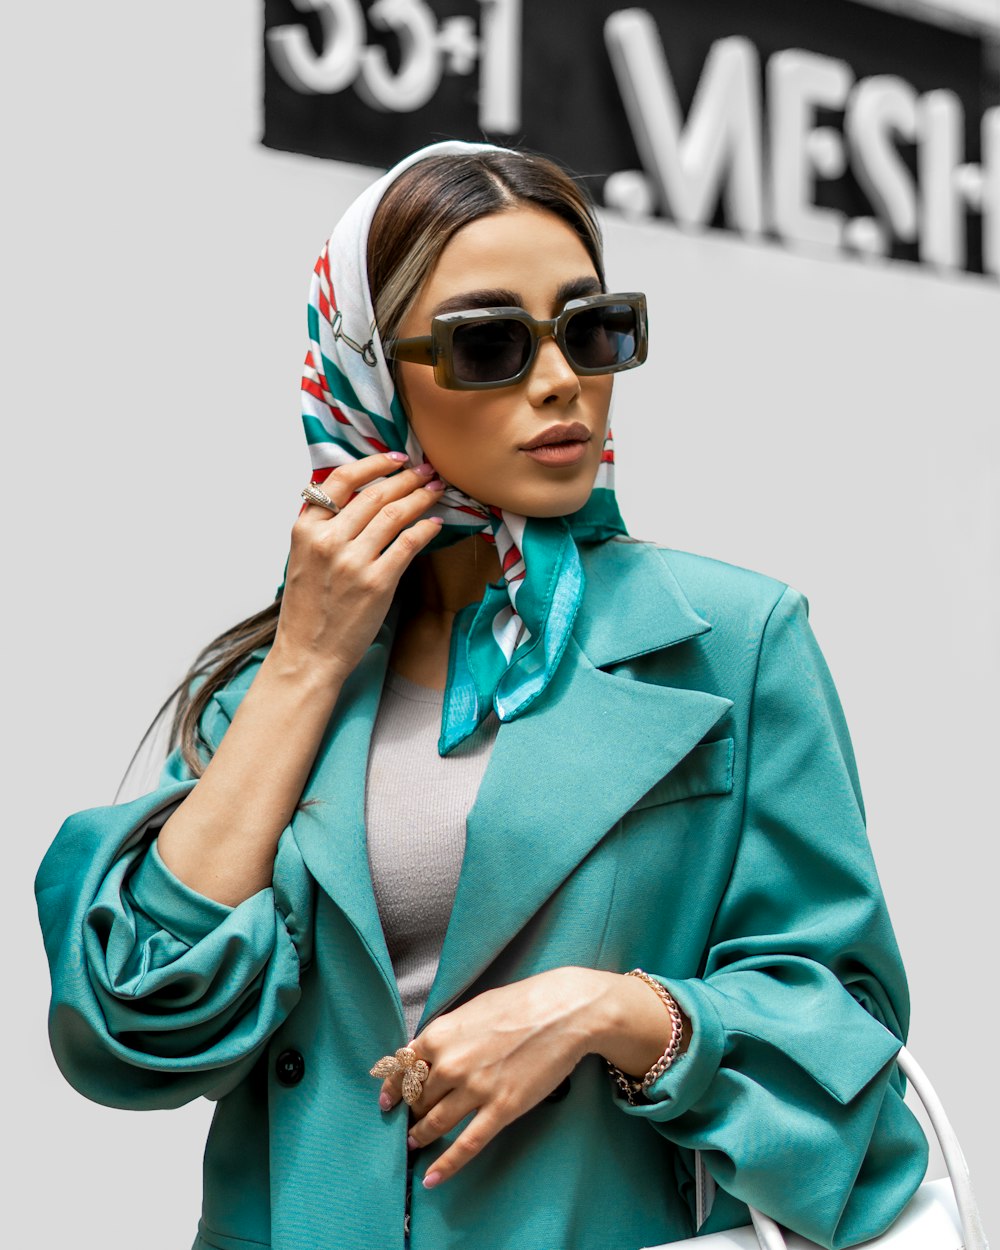 a woman wearing sunglasses and a green coat